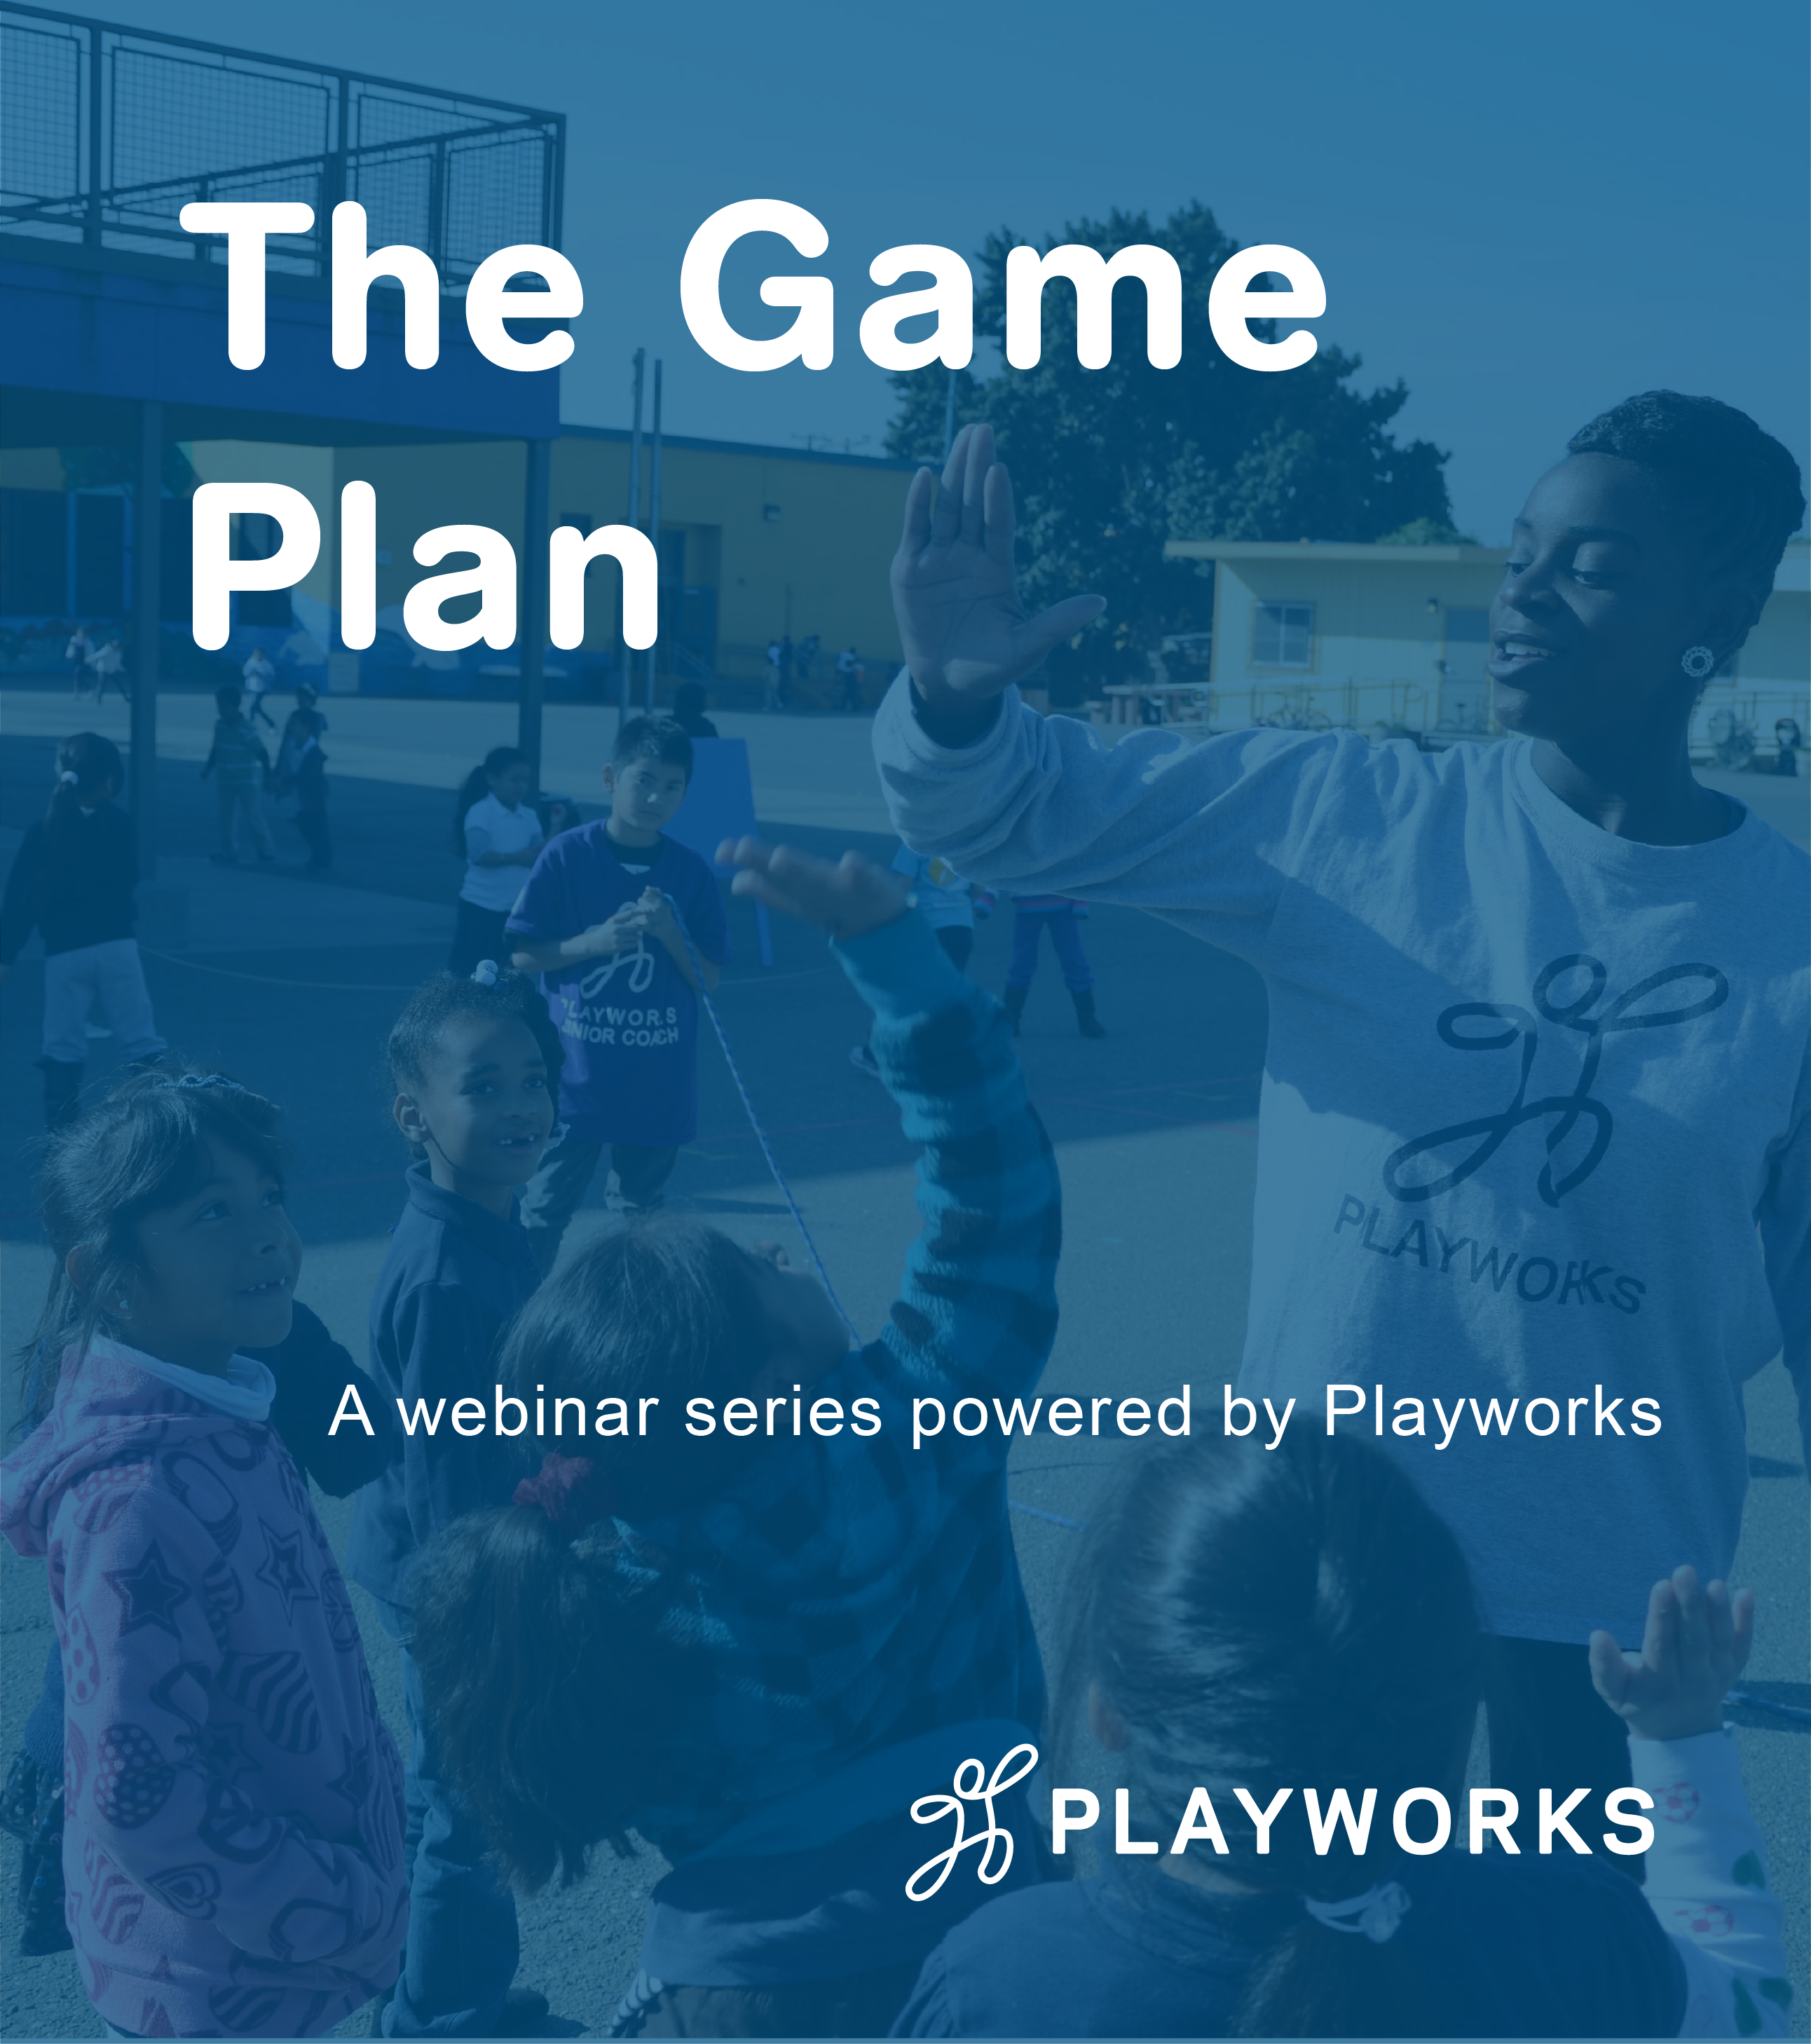 The Game Plan graphic